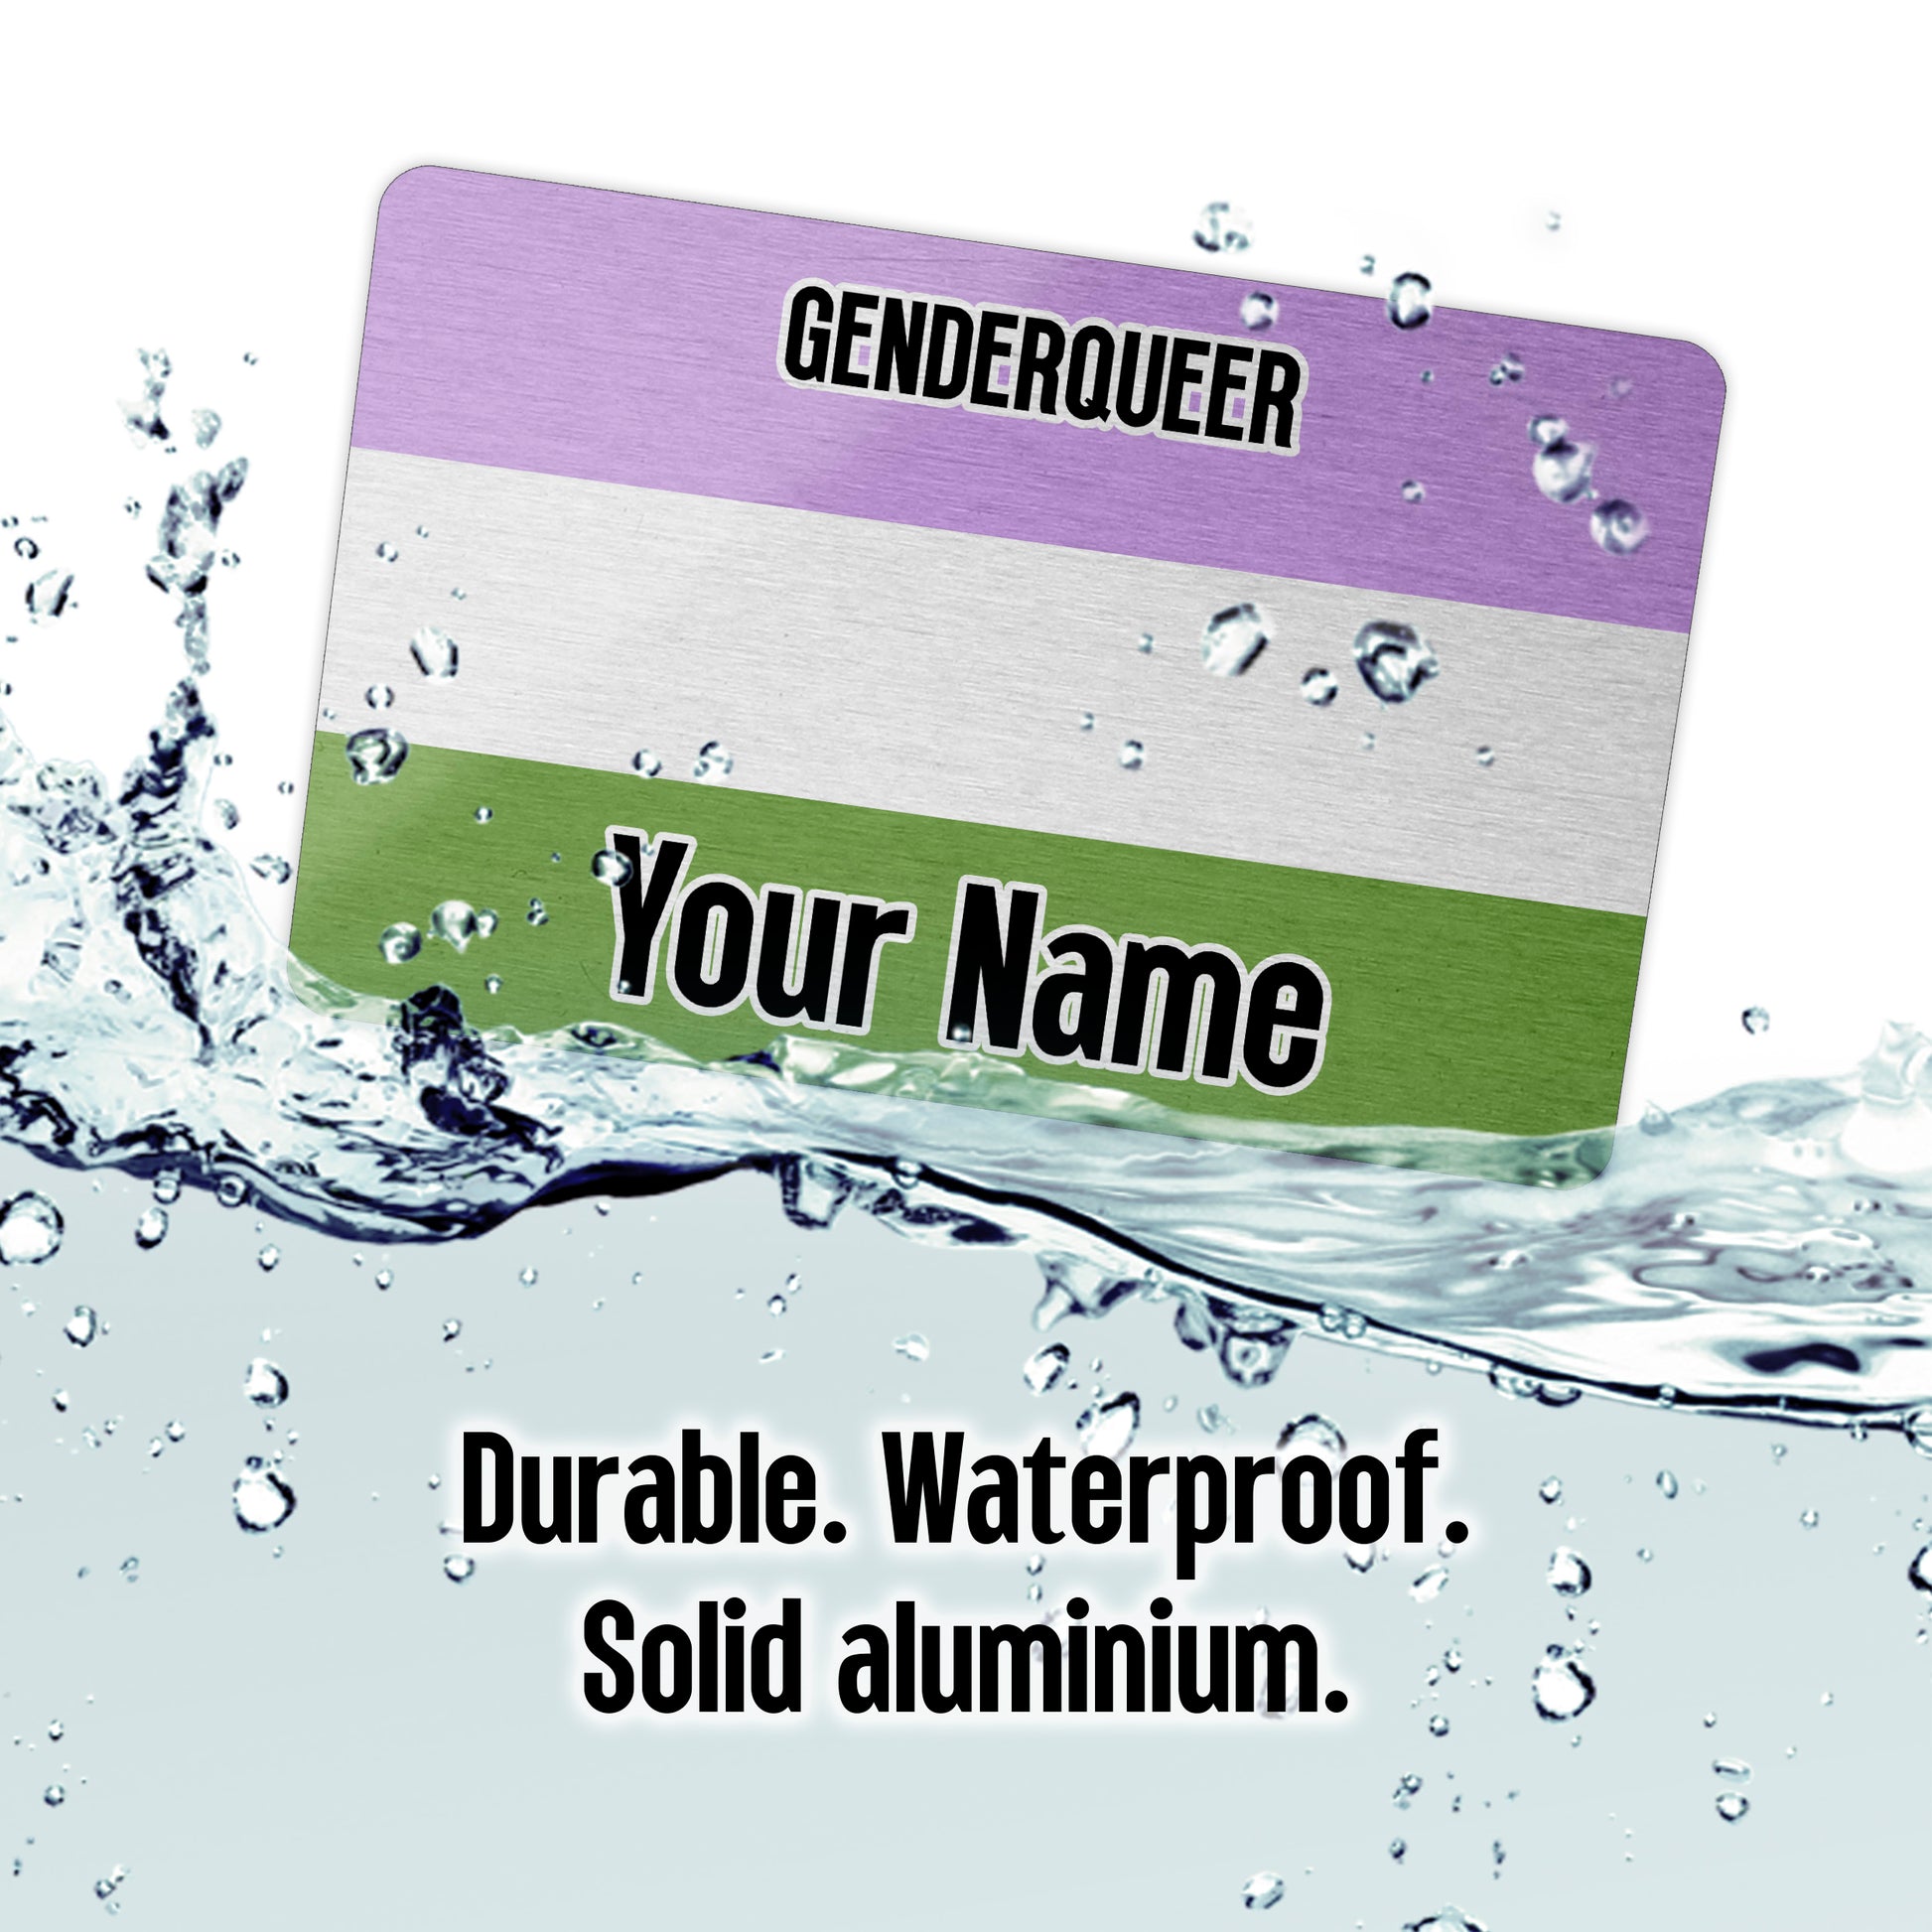 Aluminium wallet card personalised with your name and the genderqueer pride flag